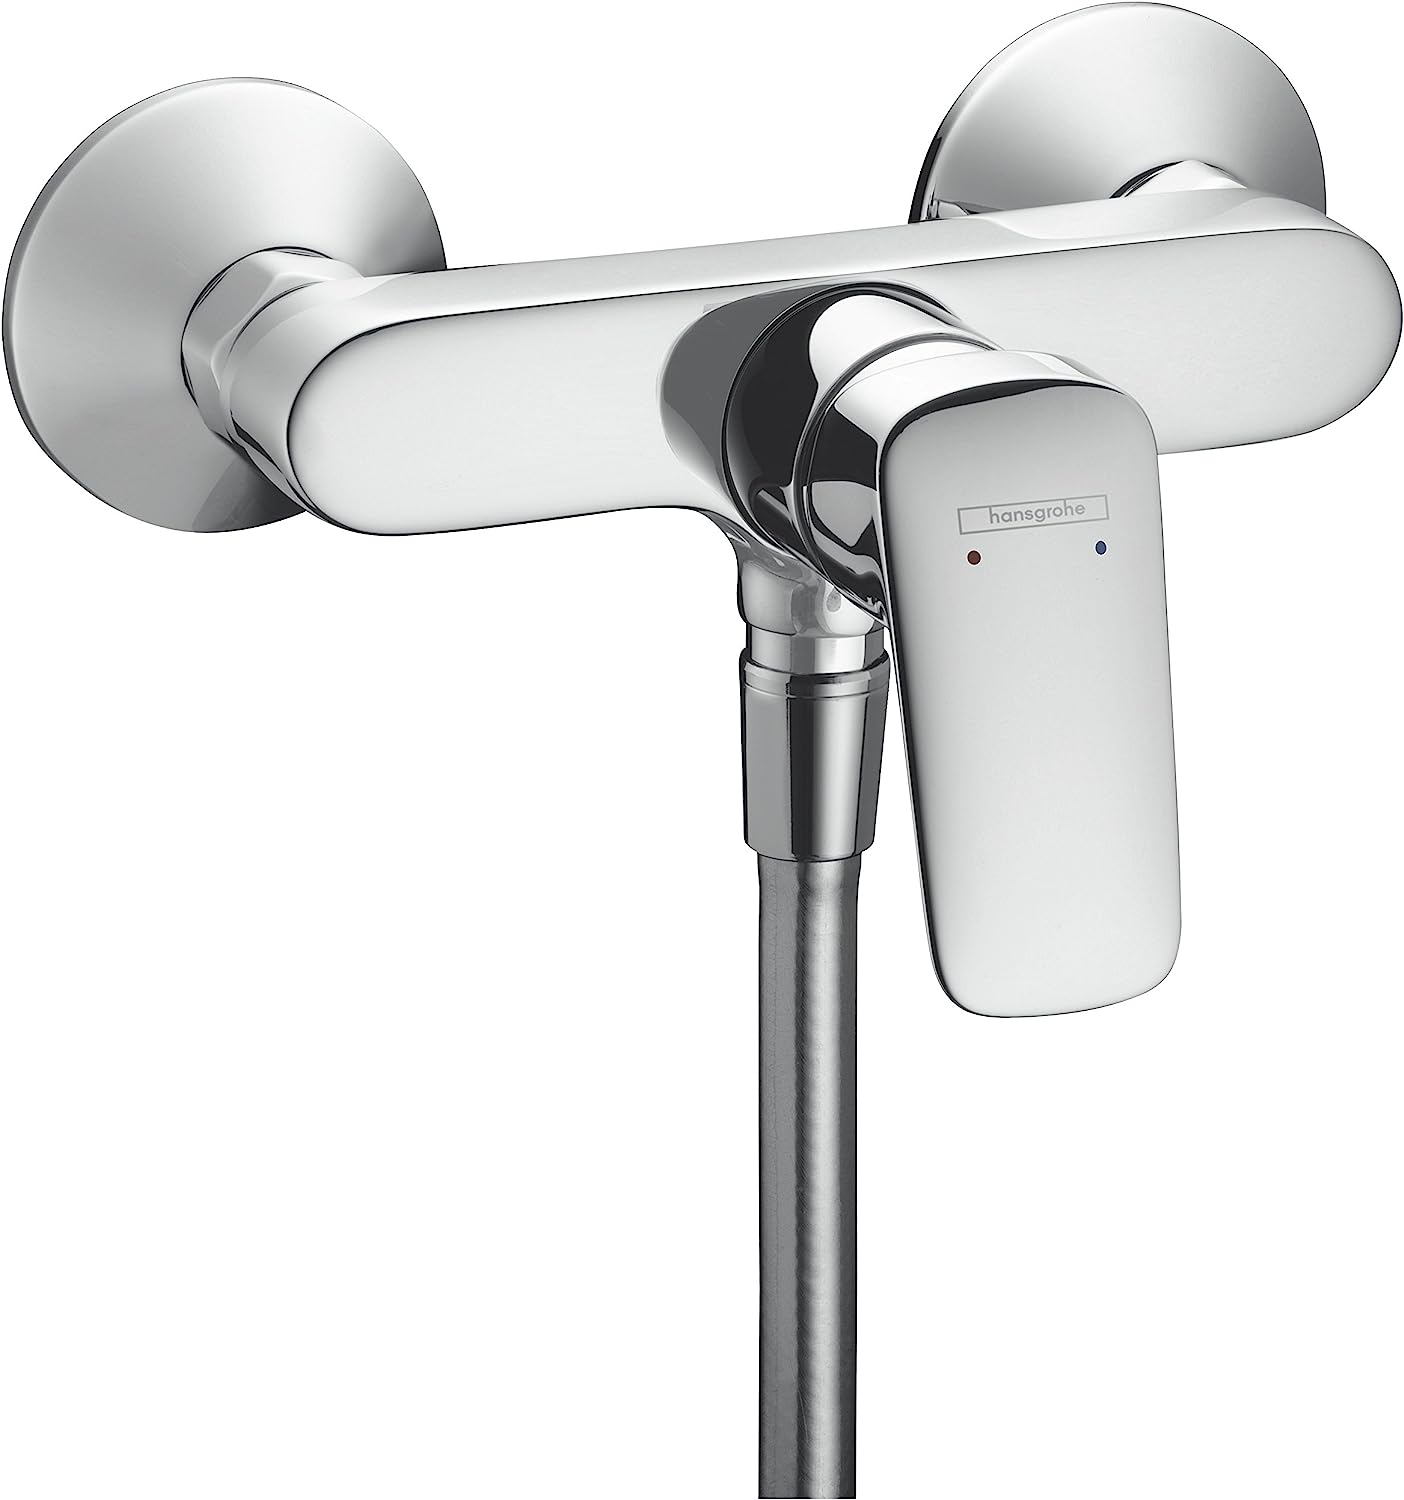 Hansgrohe MyCube 71261000 Shower Mixer Tap Chrome μπαταρια ντουζ